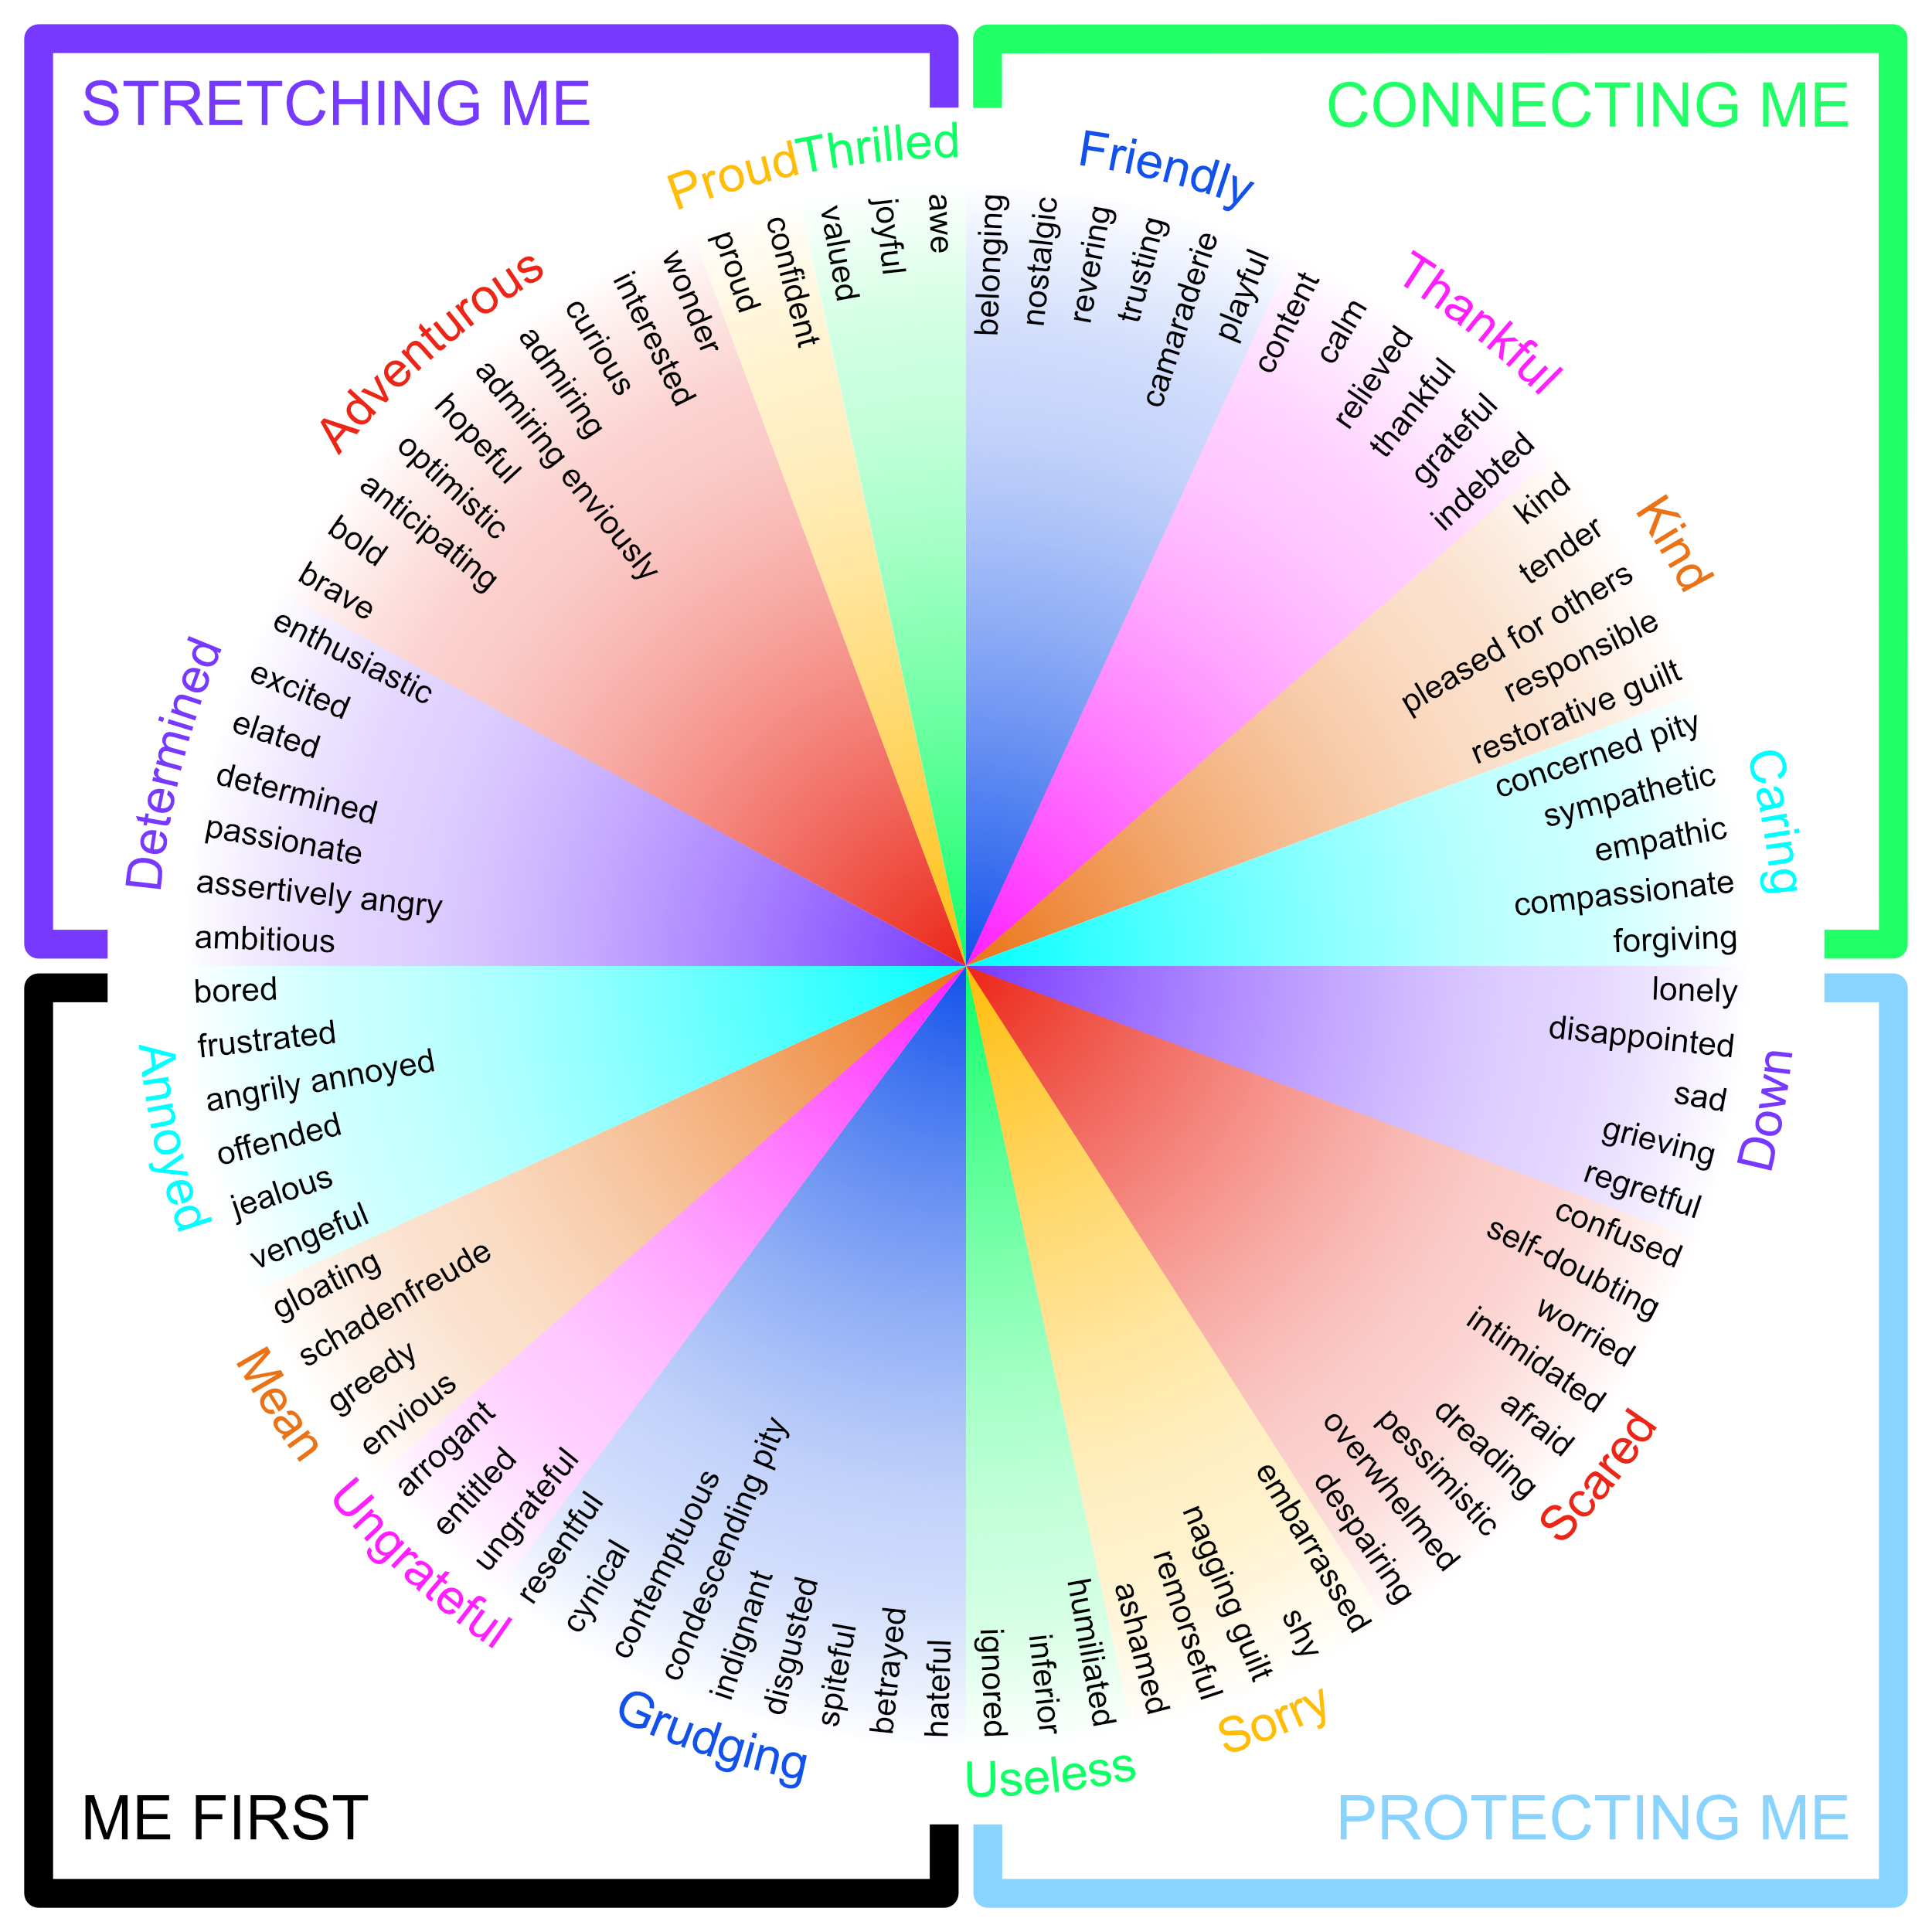 Ring of Emotion. Quadrants labels with short summary: (9-12 o-clock)Stretching Me - to feel good by aluing ourselves; (12-3 o-clock) Connecting Me - to feel good by valuing our connection with others; (3-6 o-clock) Protecting Me - to avoid feeling any worse by undervaluing ourselves; (6-9 o-clock) Me First - to feel better about ourselves by de-valuing others.